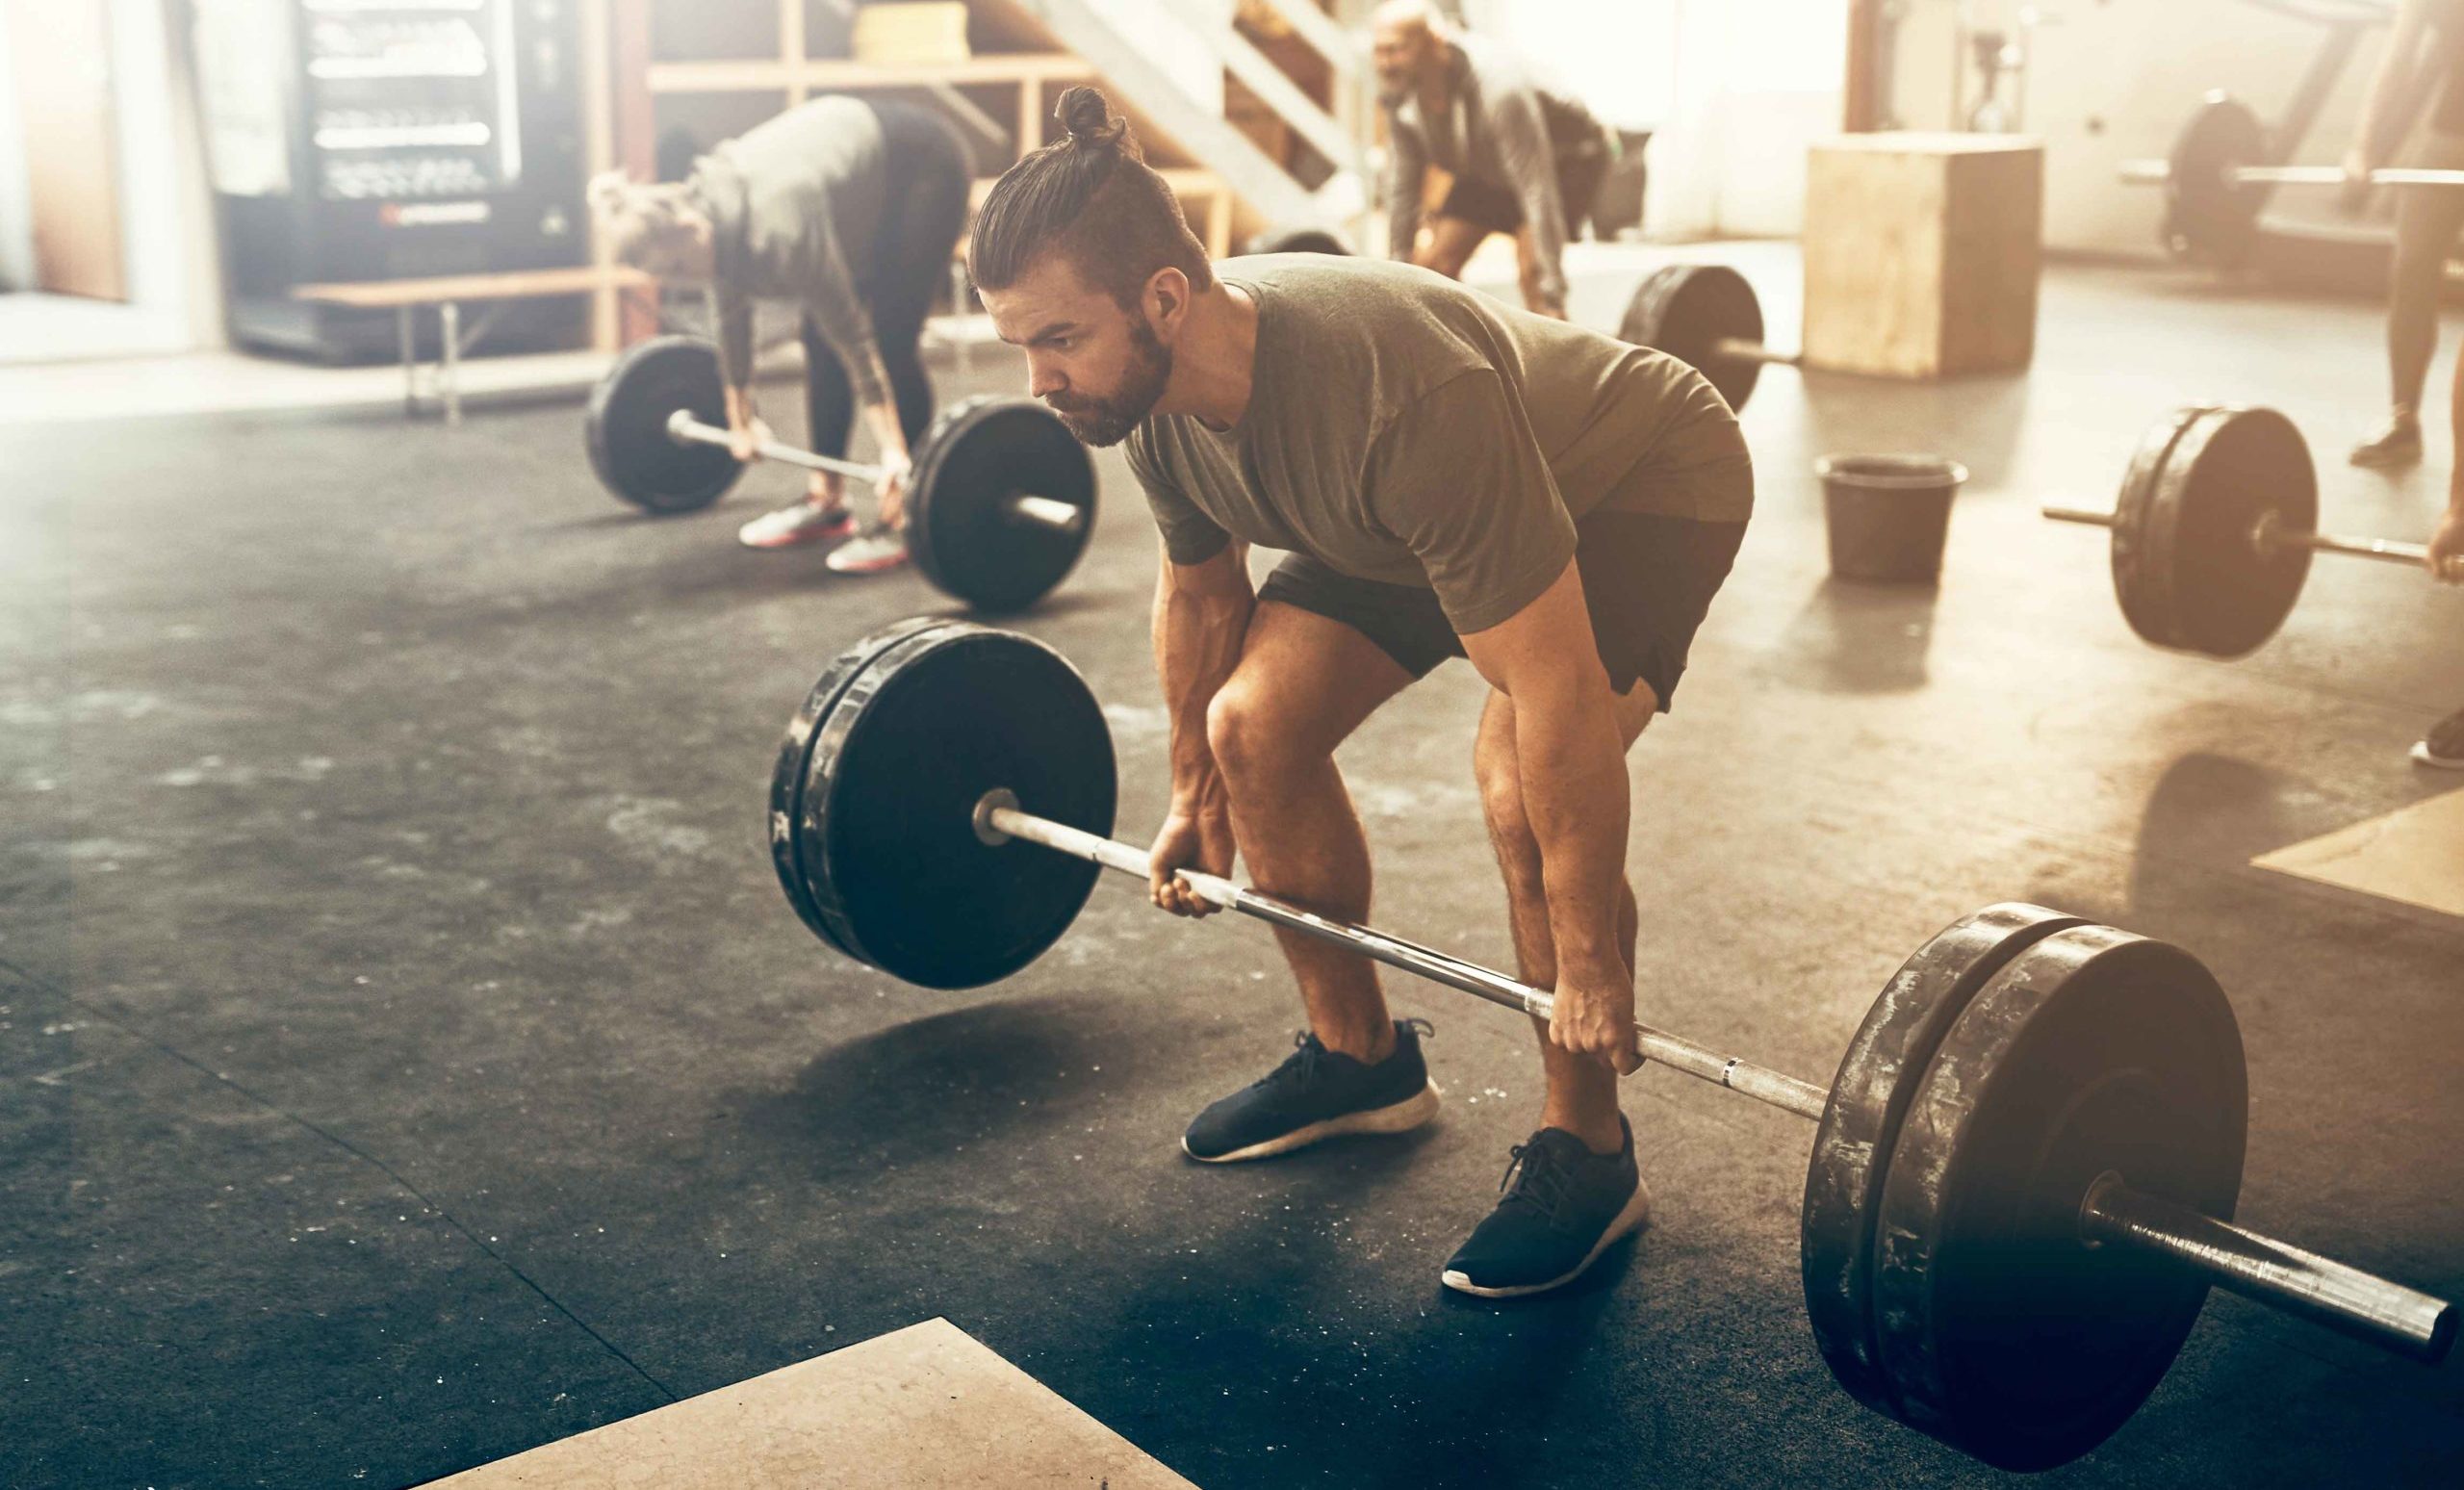 The 7 workout variables for the ultimate training session